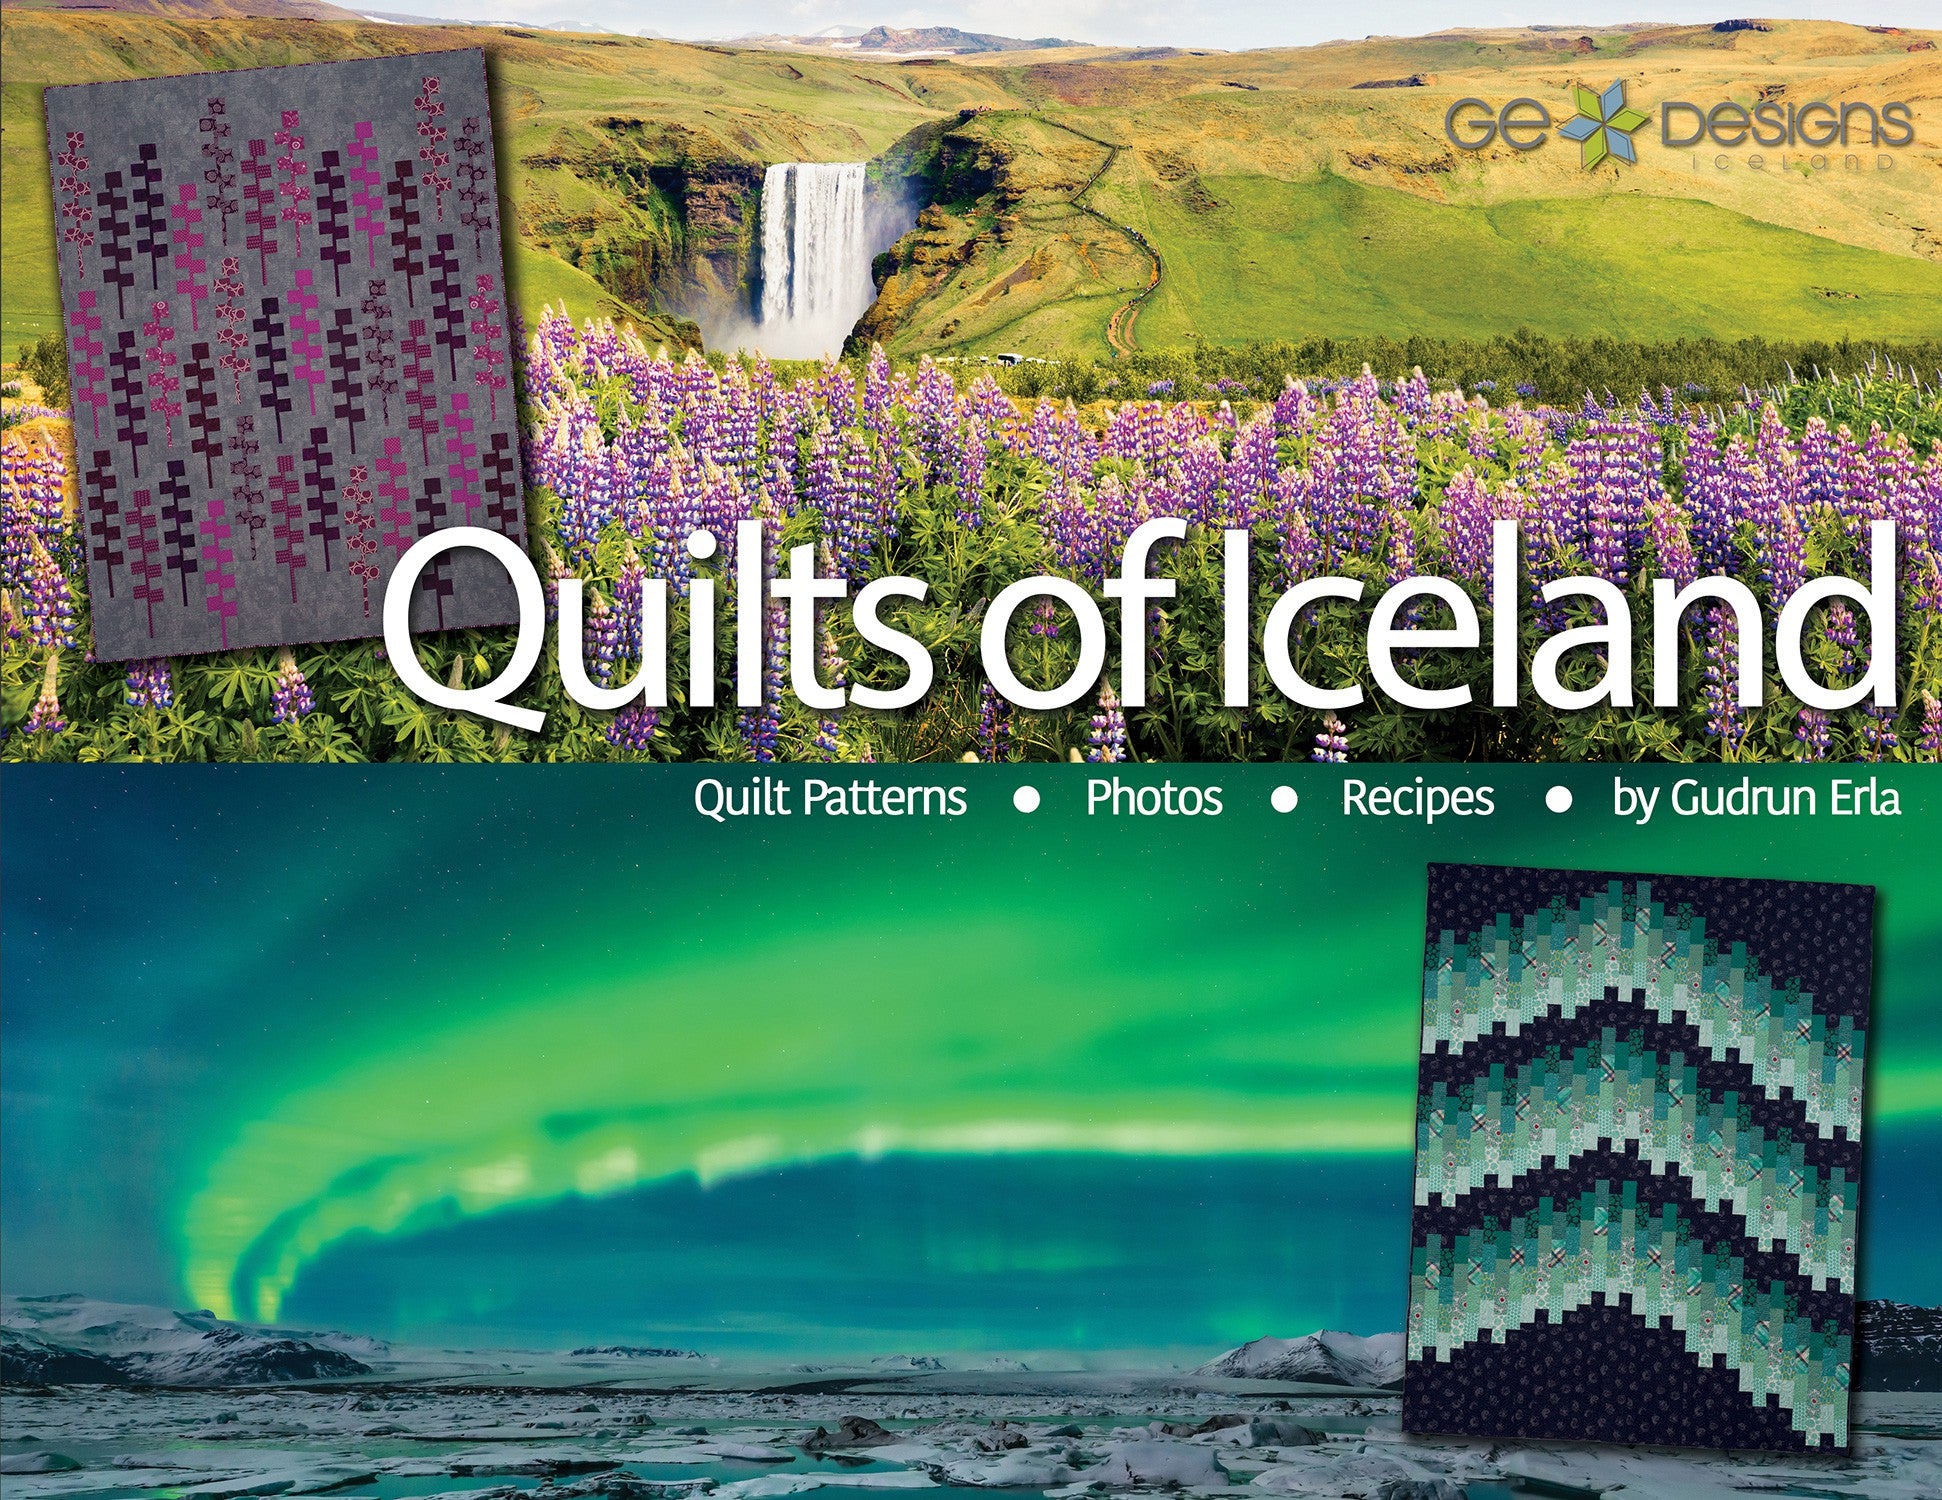 Quilts of Iceland Patterns Photos Recipes Book by Gudrun Erla of G.E. Designs